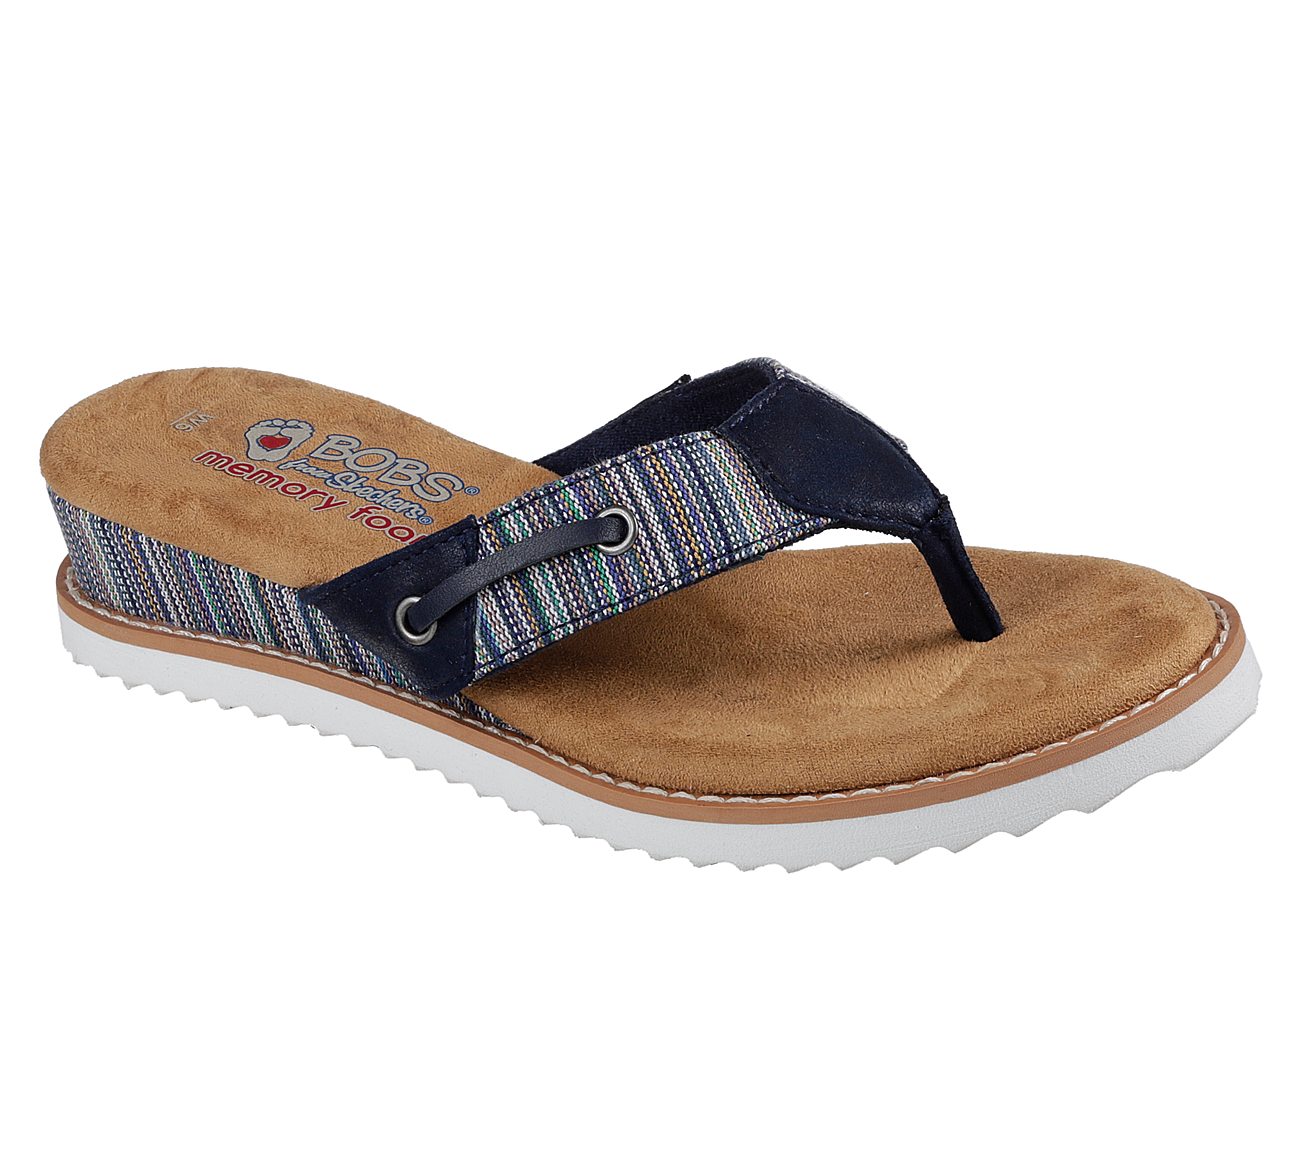 bobs from skechers sandals